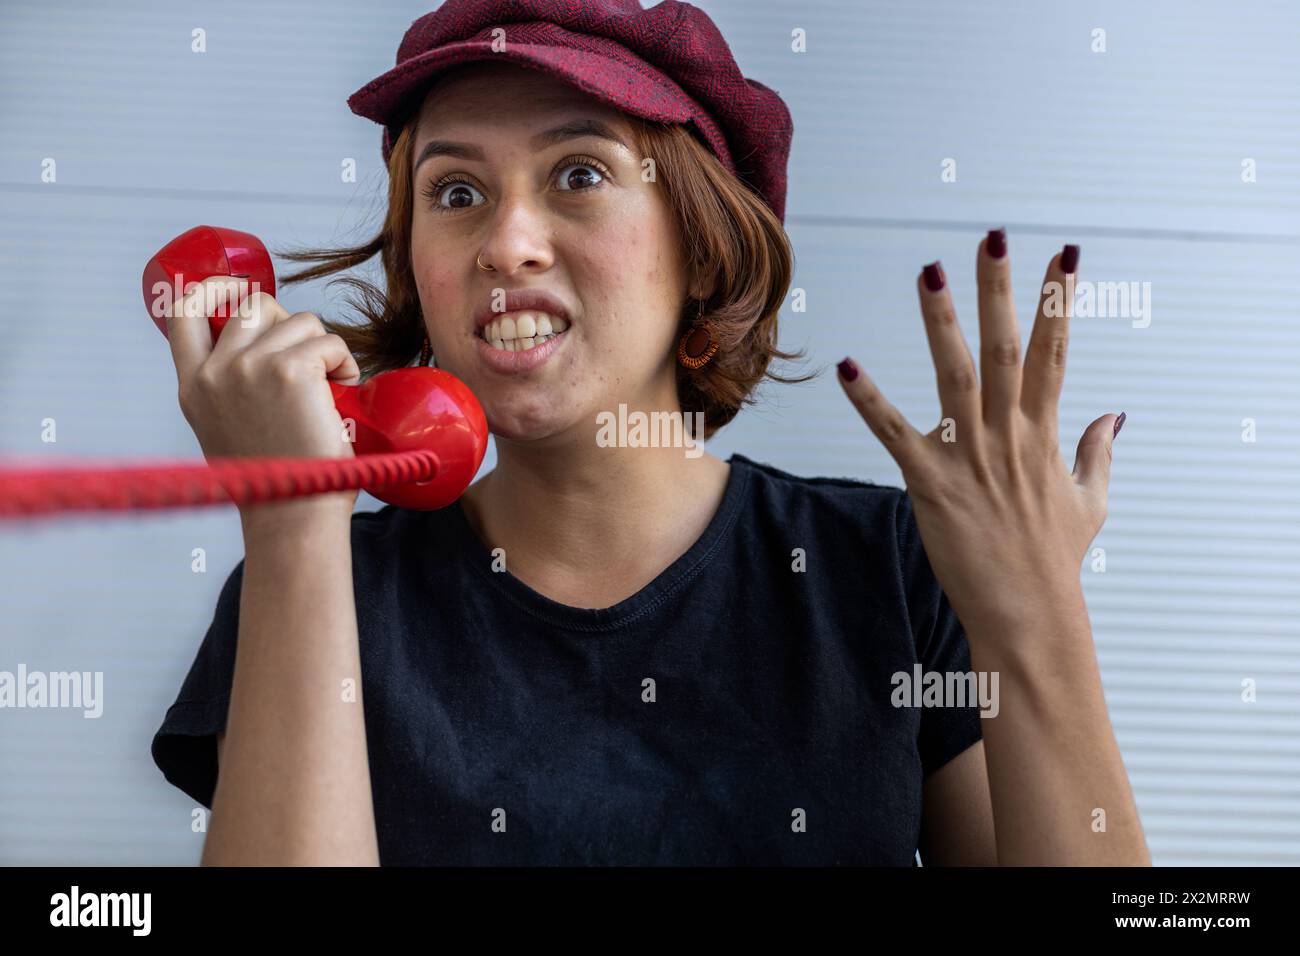 Medium short shot of young Latin American girl (22) with cap and red hair angry talking on retro red Handset. Vintage technology concept. Stock Photo